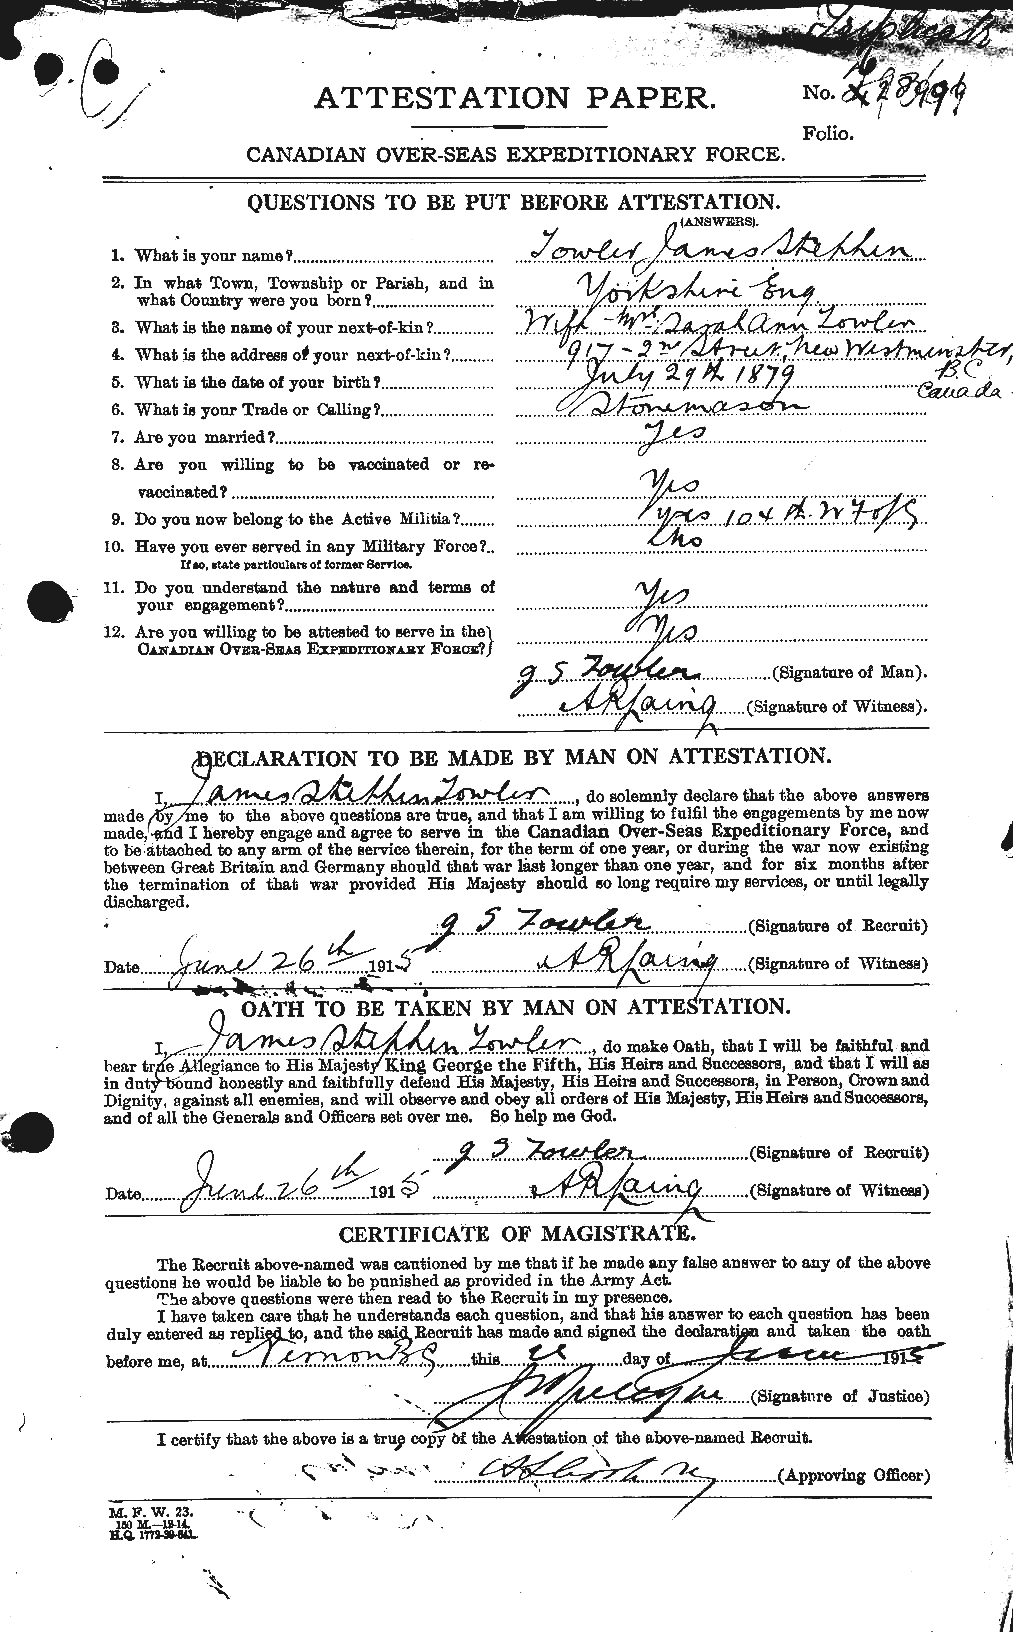 Personnel Records of the First World War - CEF 636278a